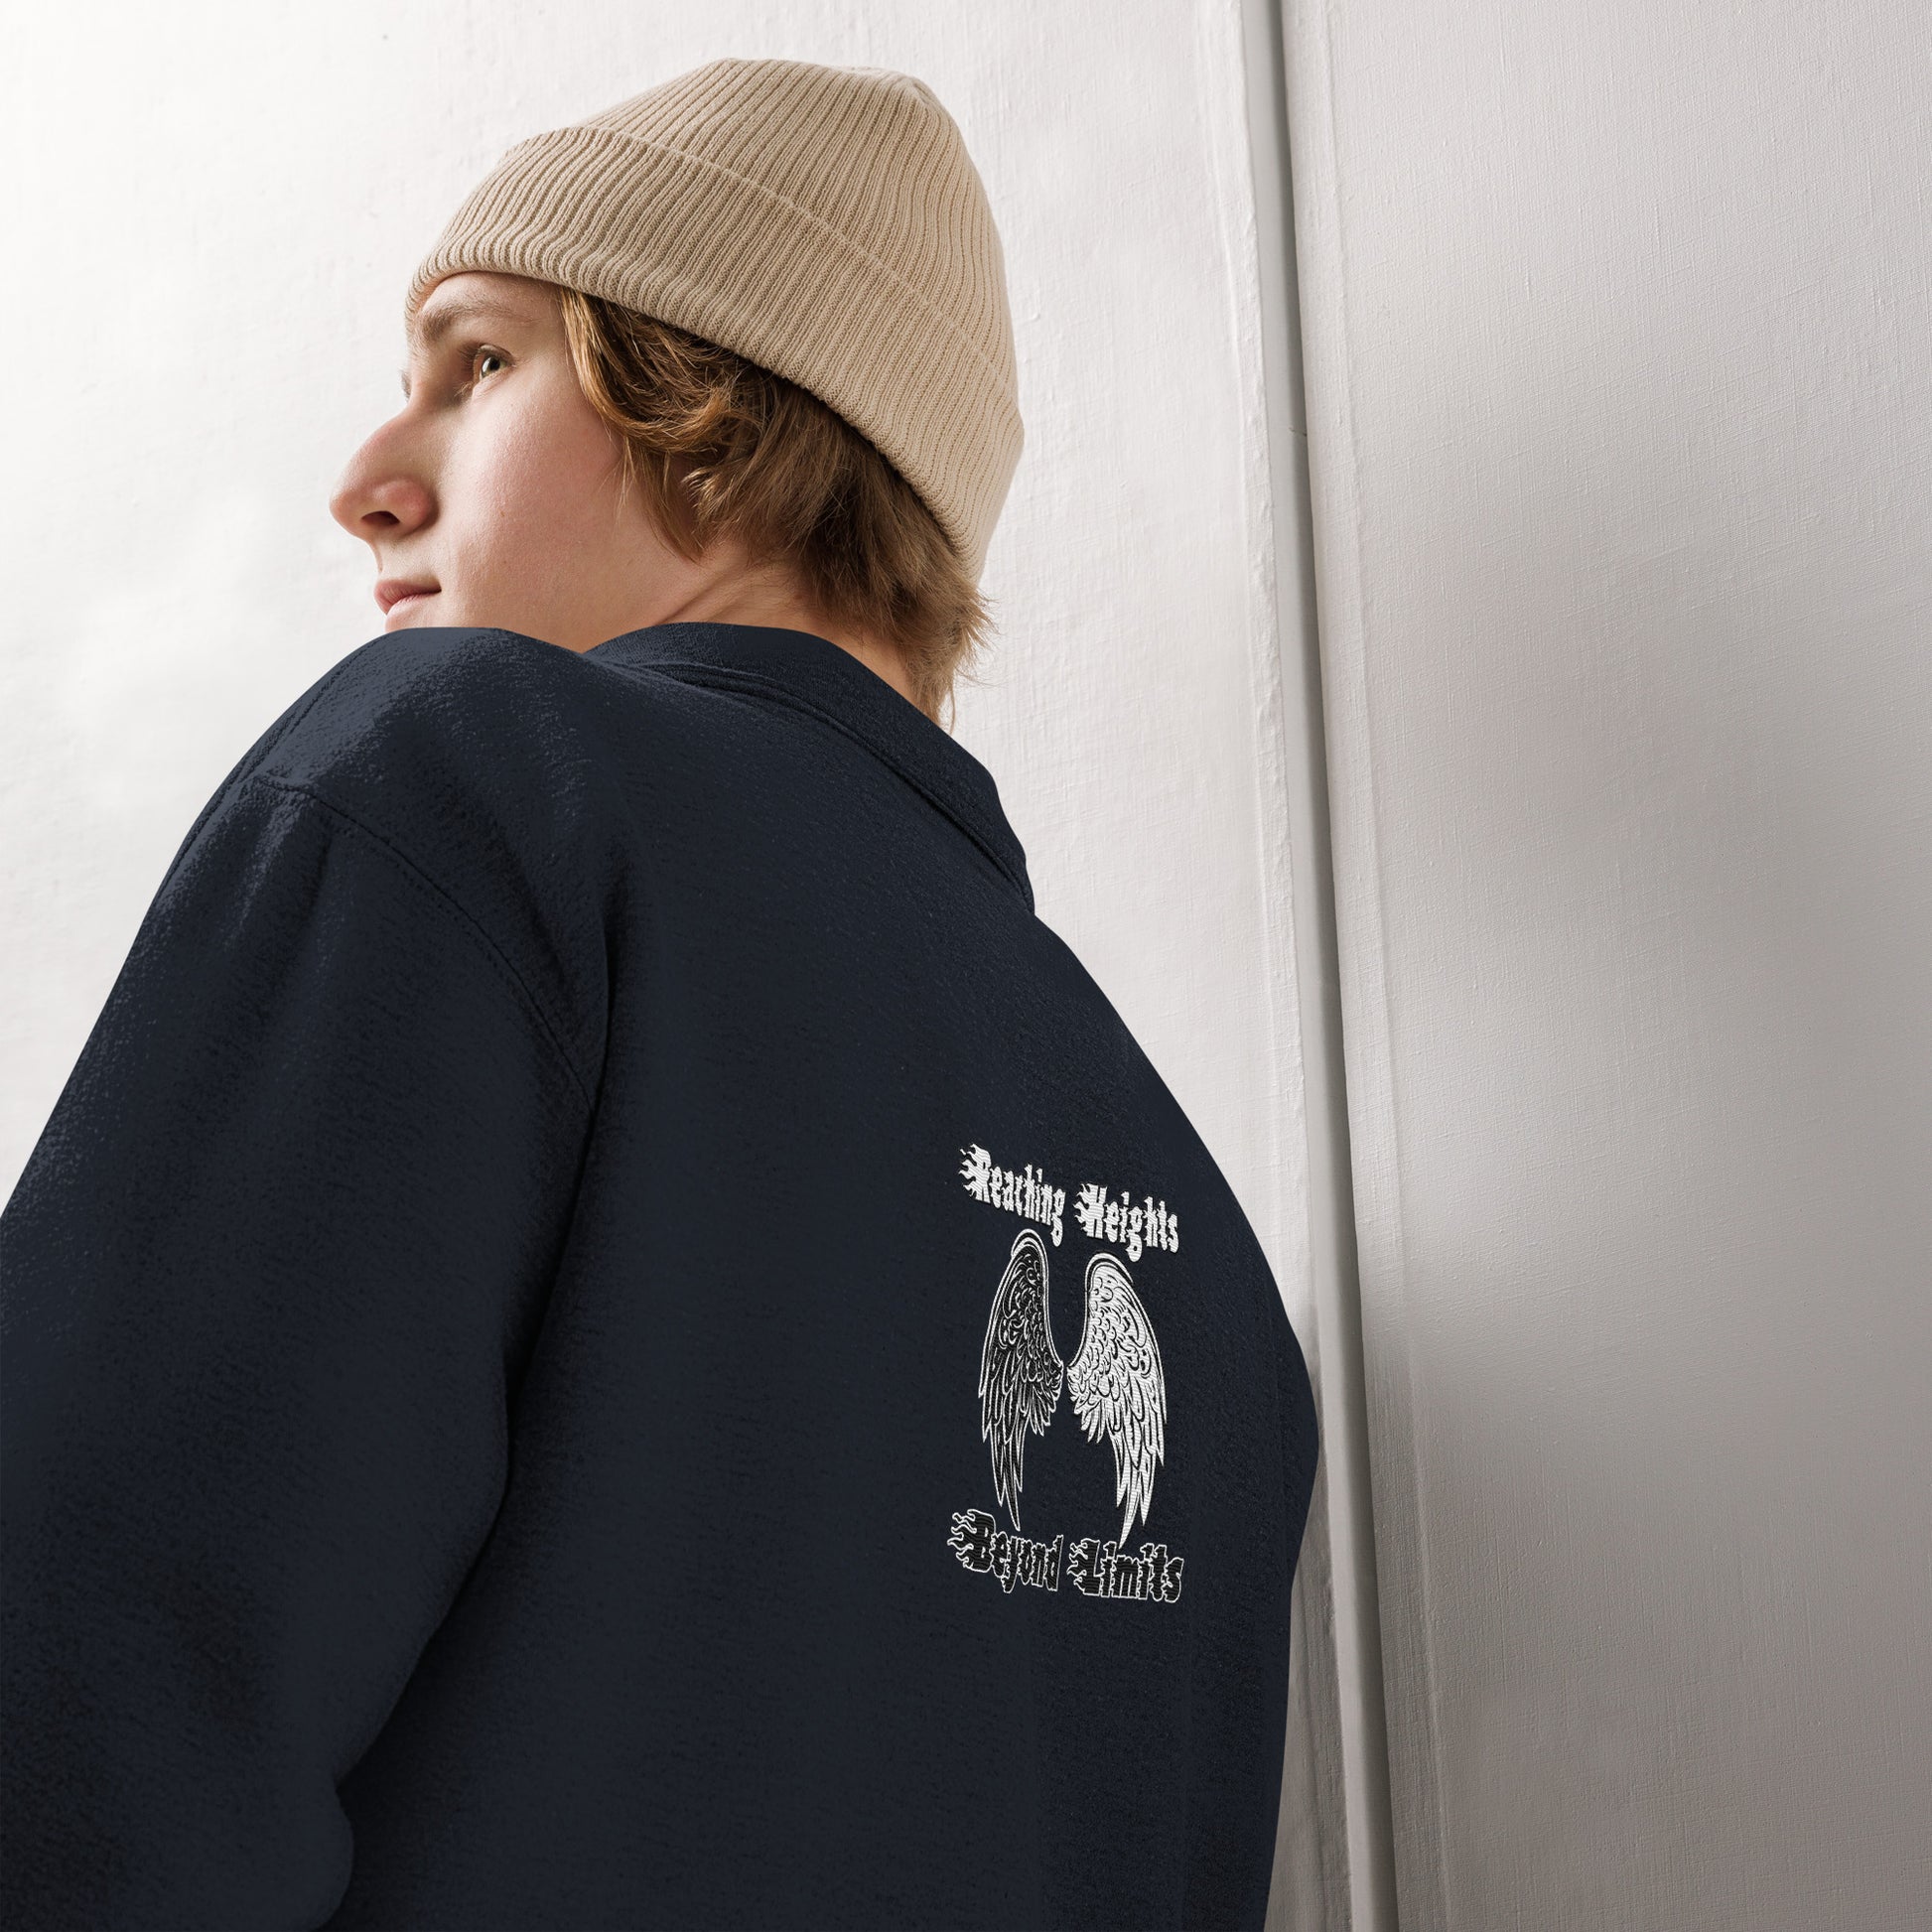 Niccie's Unleash Potential Reaching Heights' Unisex Fleece Pullover Elevate Comfort & Style